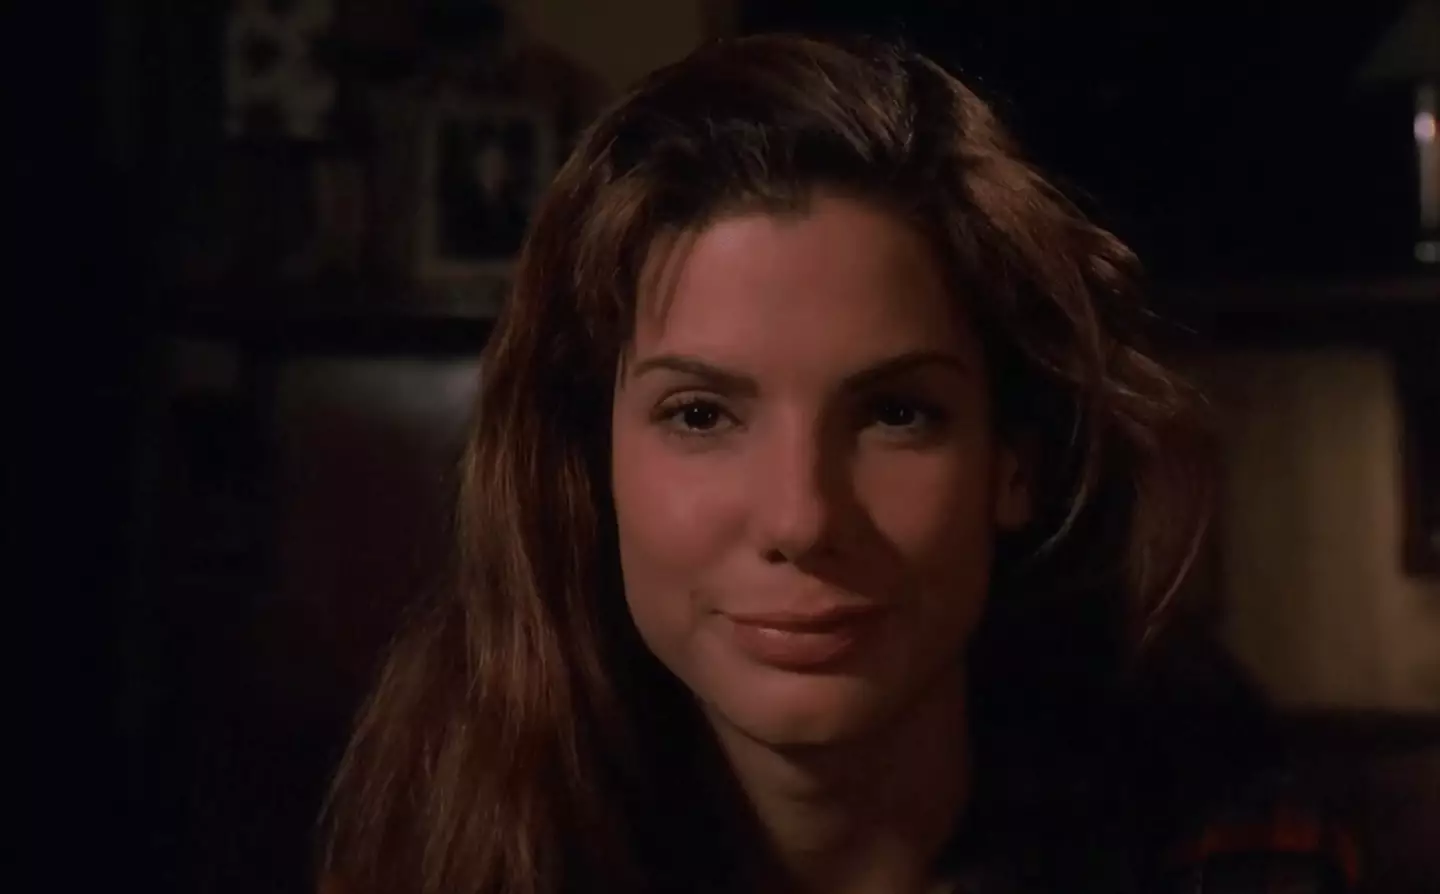 The 90s' flick starring Sandra Bullock can now be streamed on Netflix.